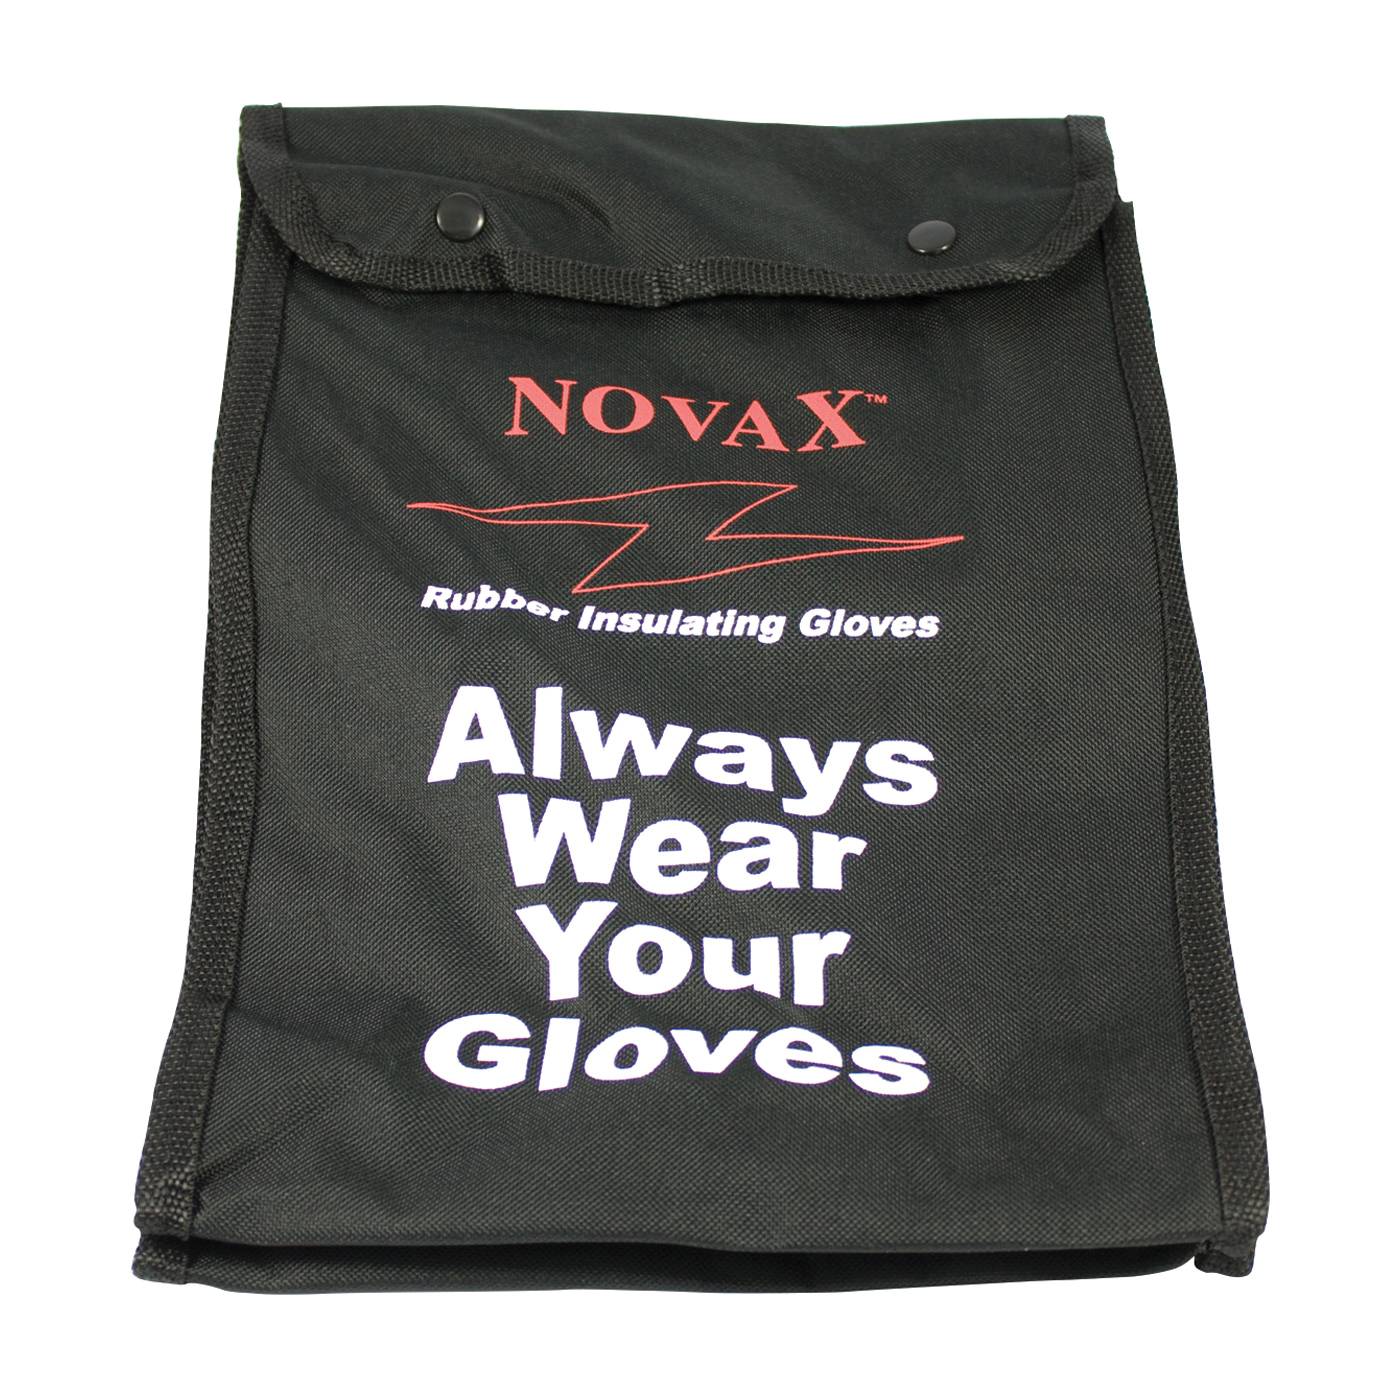 Novax® 148-2136 Protective Bag, Plastic Hook, Snap Closure, For Use With Novax Rubber Insulating Gloves, Nylon, Black with Red/White Lettering (Discontinued by Manufacturer)